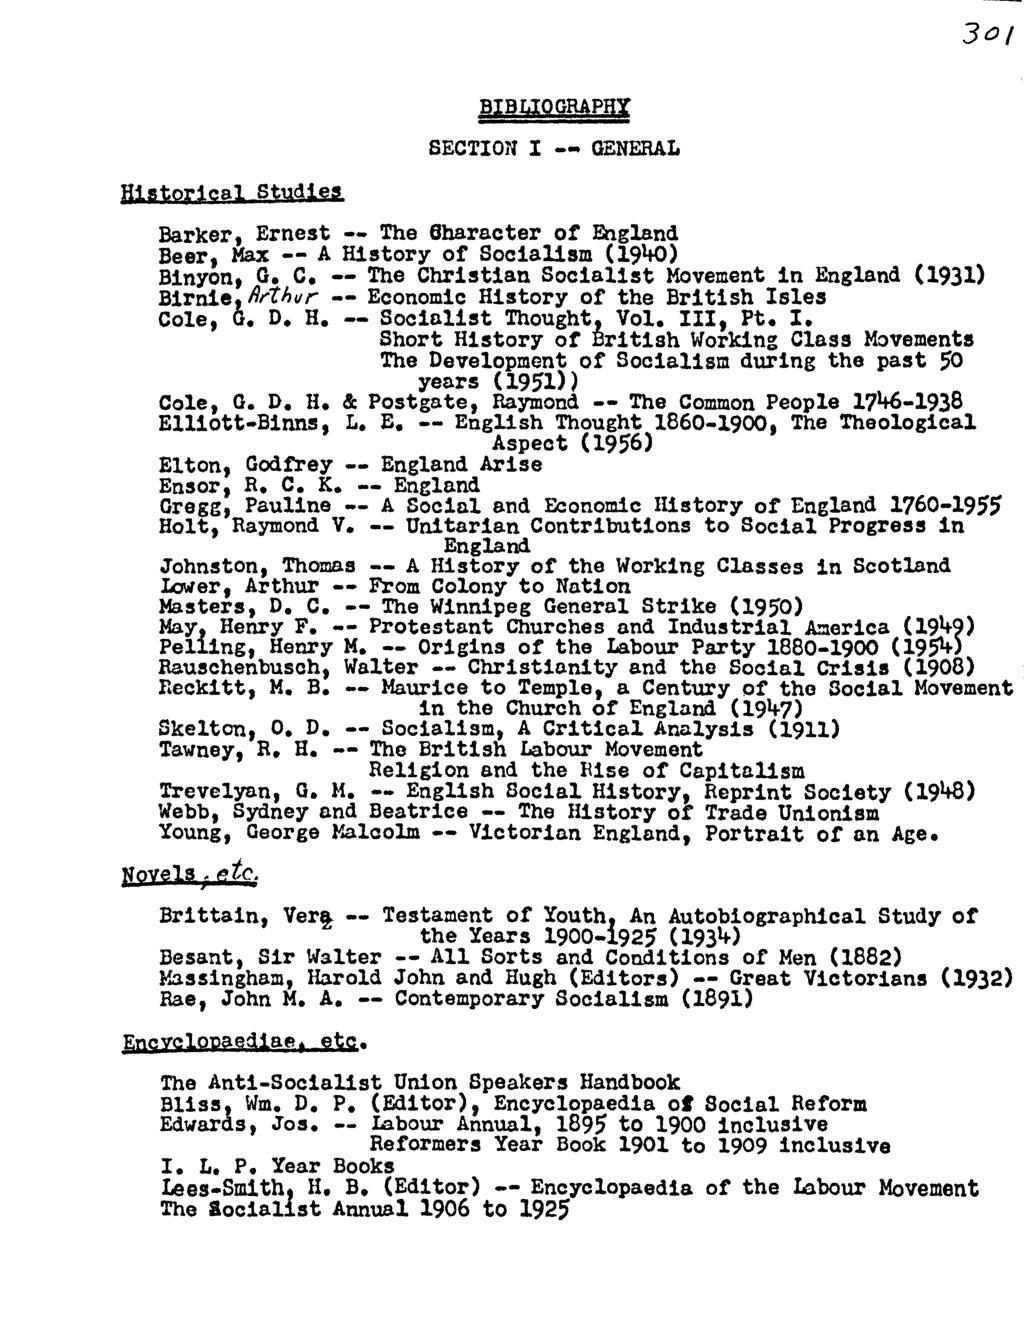 301 BIBLIOGRAPHY SECTION I -- GENERAL Historical Studies Barker, Ernest -- The 8haracter of England Beer, Max -- A Hi story of Socialism (1940) Binyon, G. C.